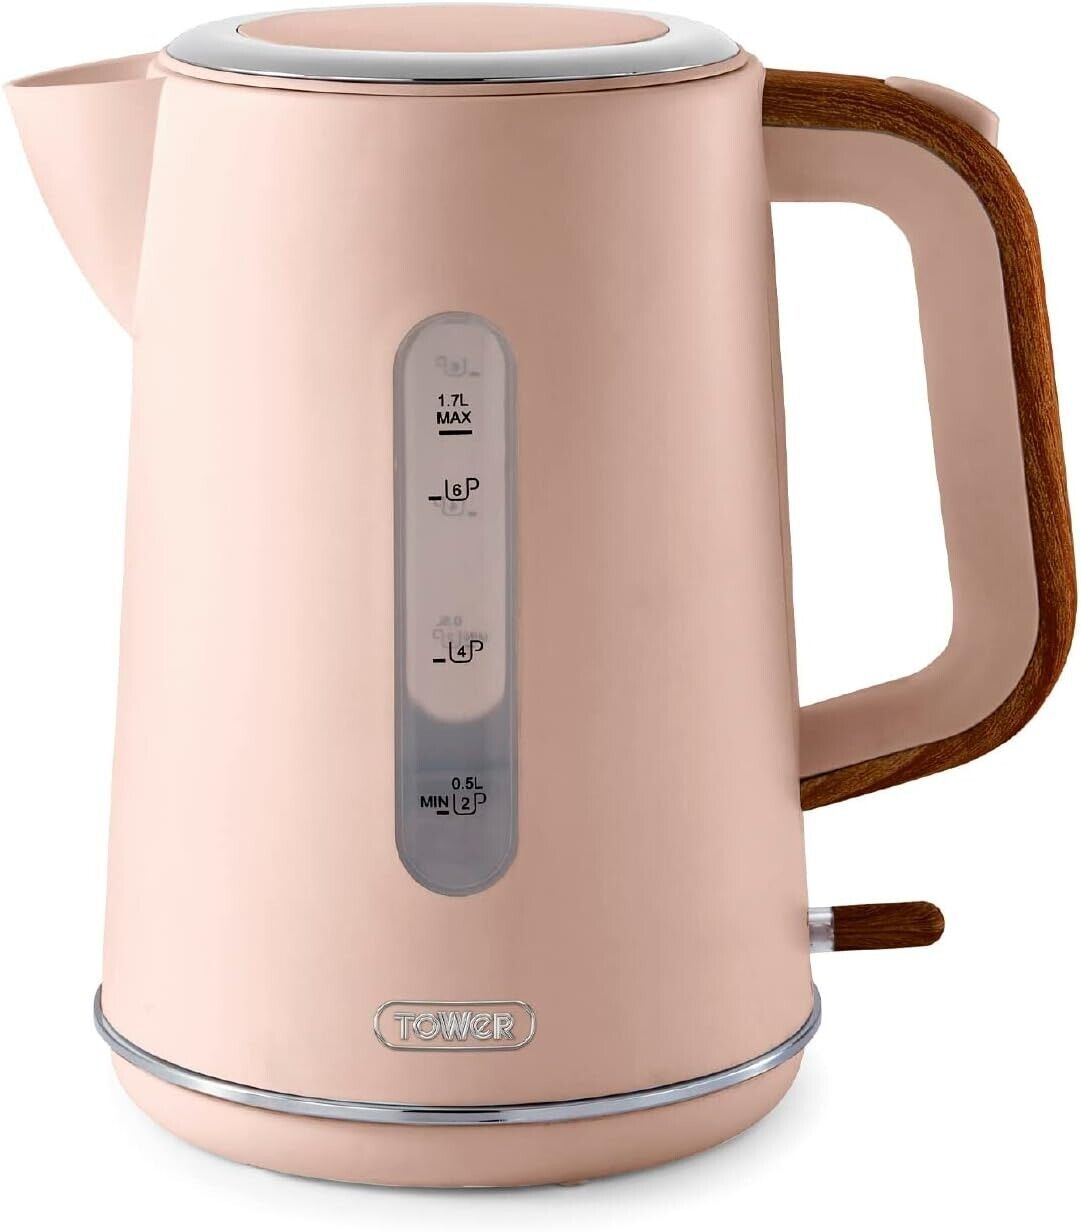 Tower Scandi 1.7L 3KW Jug Kettle Rapid Boil Pink Clay T10037PCLY